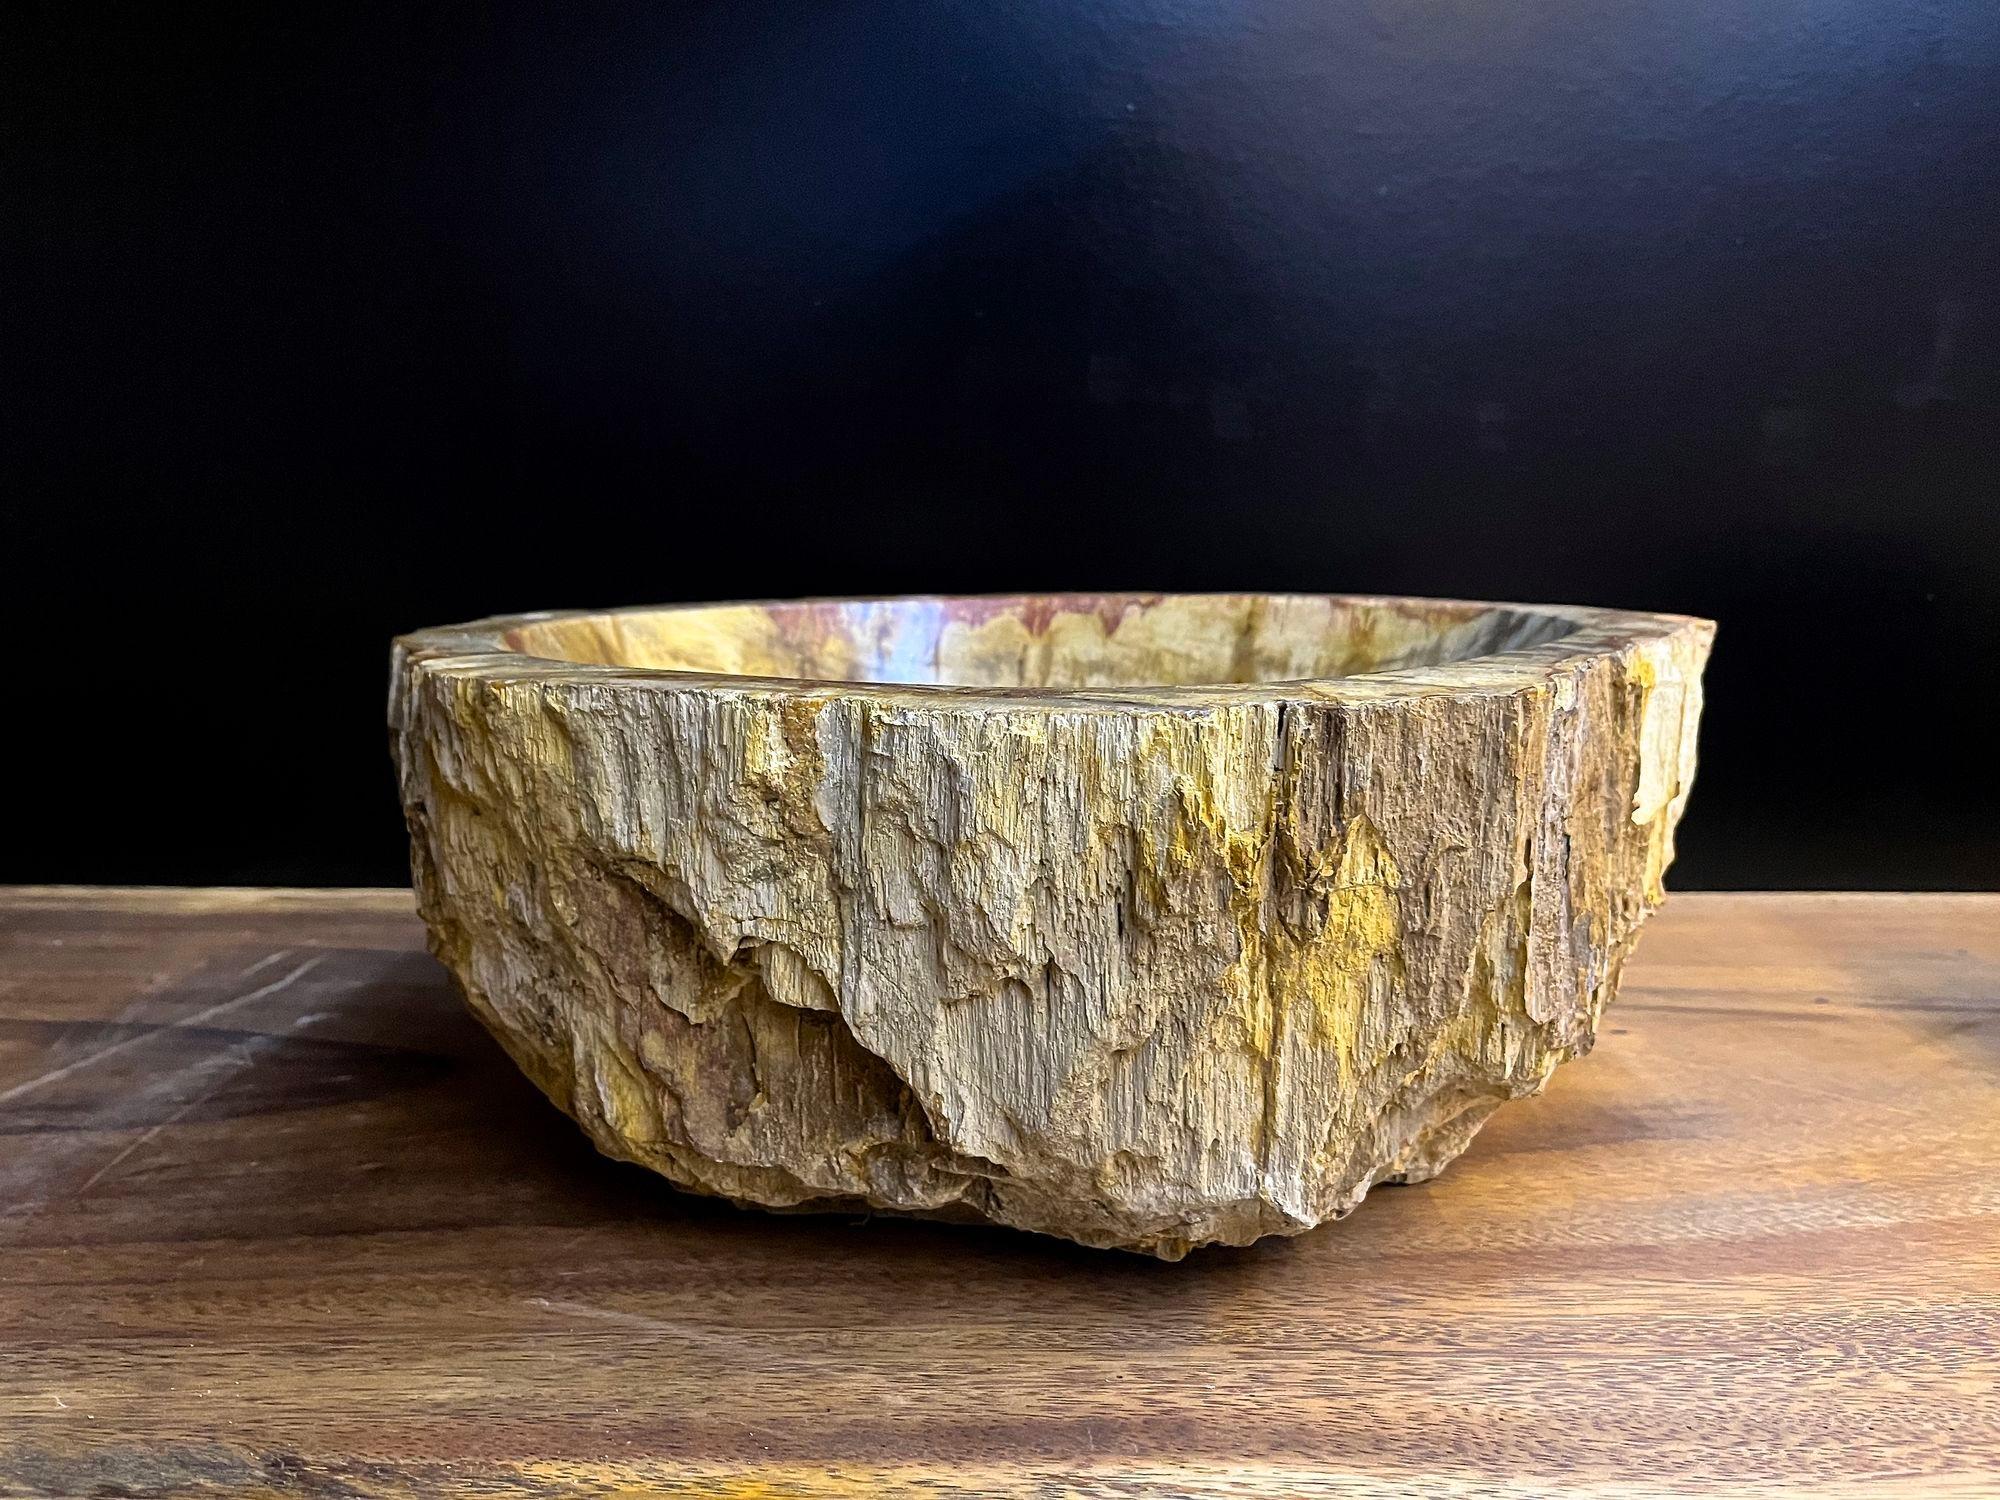 One of a kind organic modern petrified wood sink in absolute top quality. This unique single 